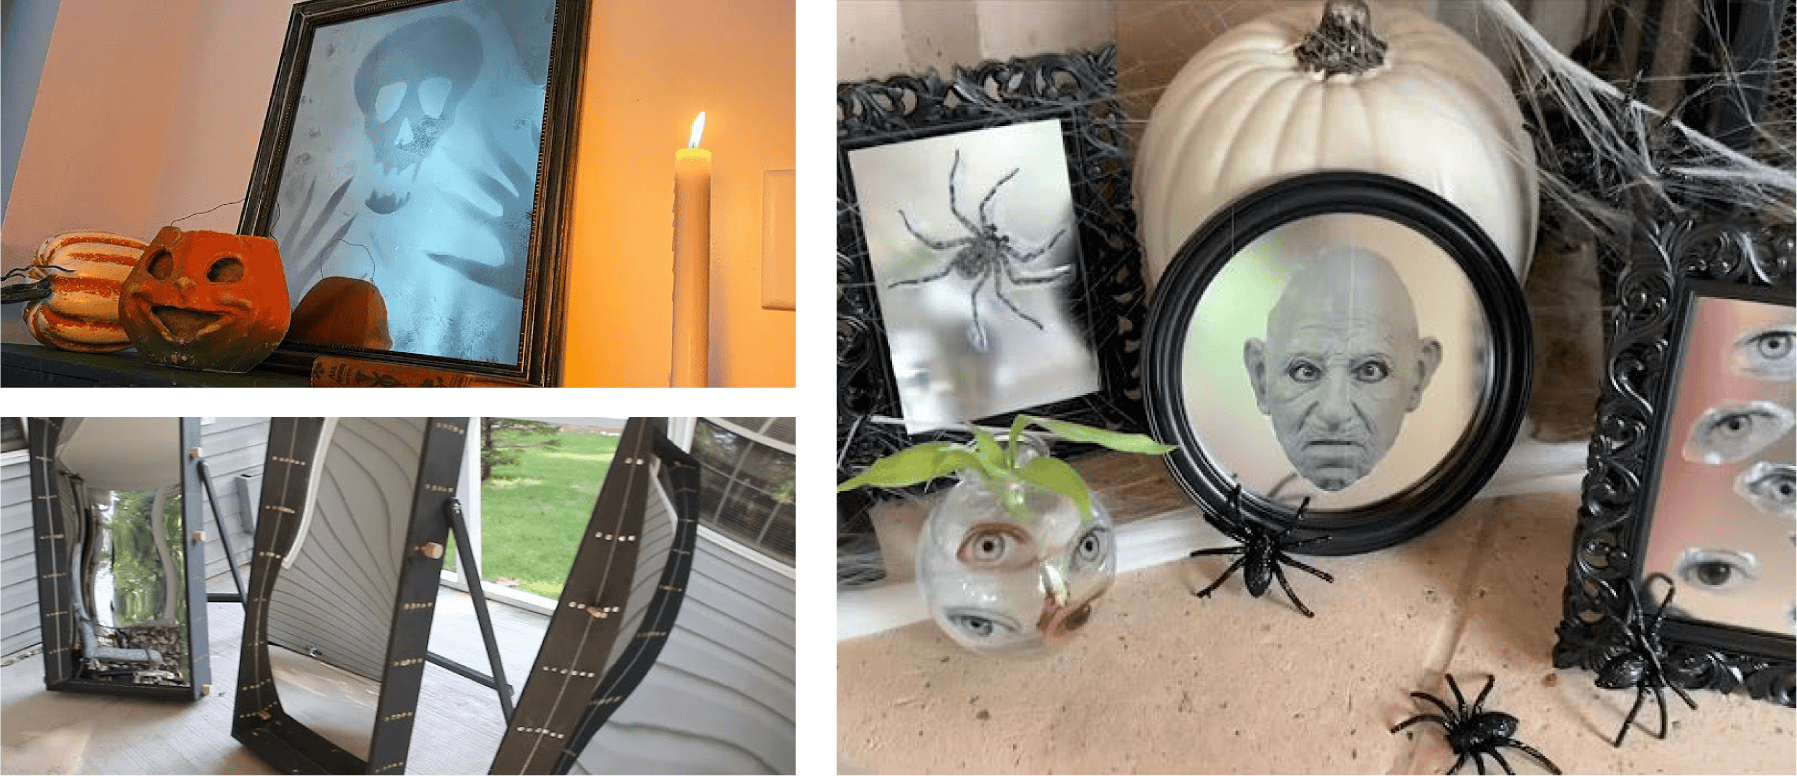 Halloween-themed mirror decorations to transform your home into a spooky haven.